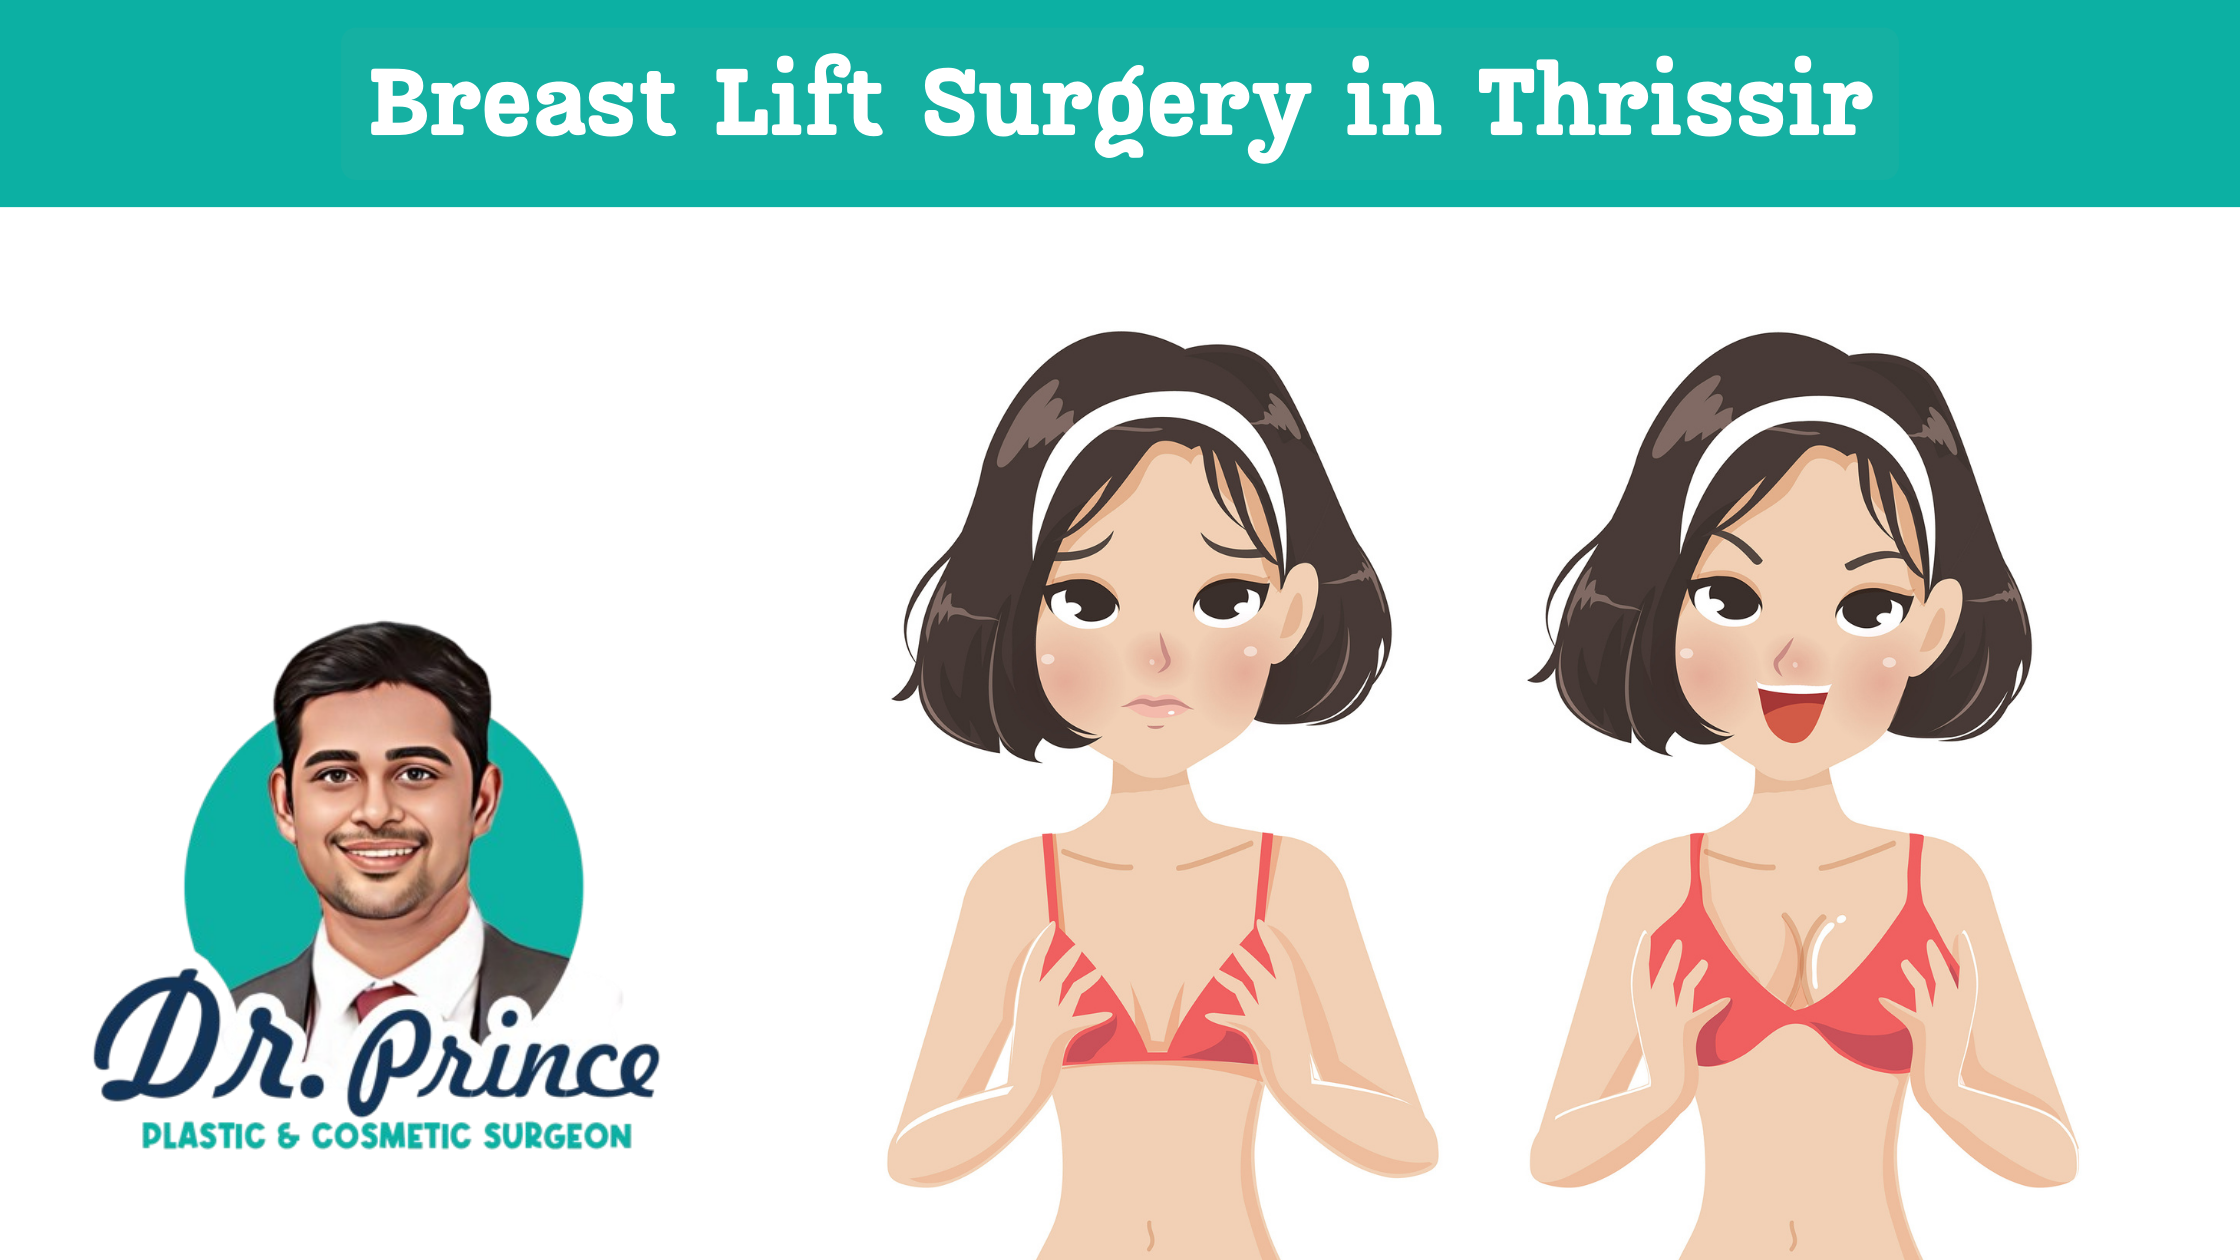 Breast Lift in Thrissur - Dr. Prince performing a mastopexy procedure at Sushrutha Institute of Plastic Surgery.